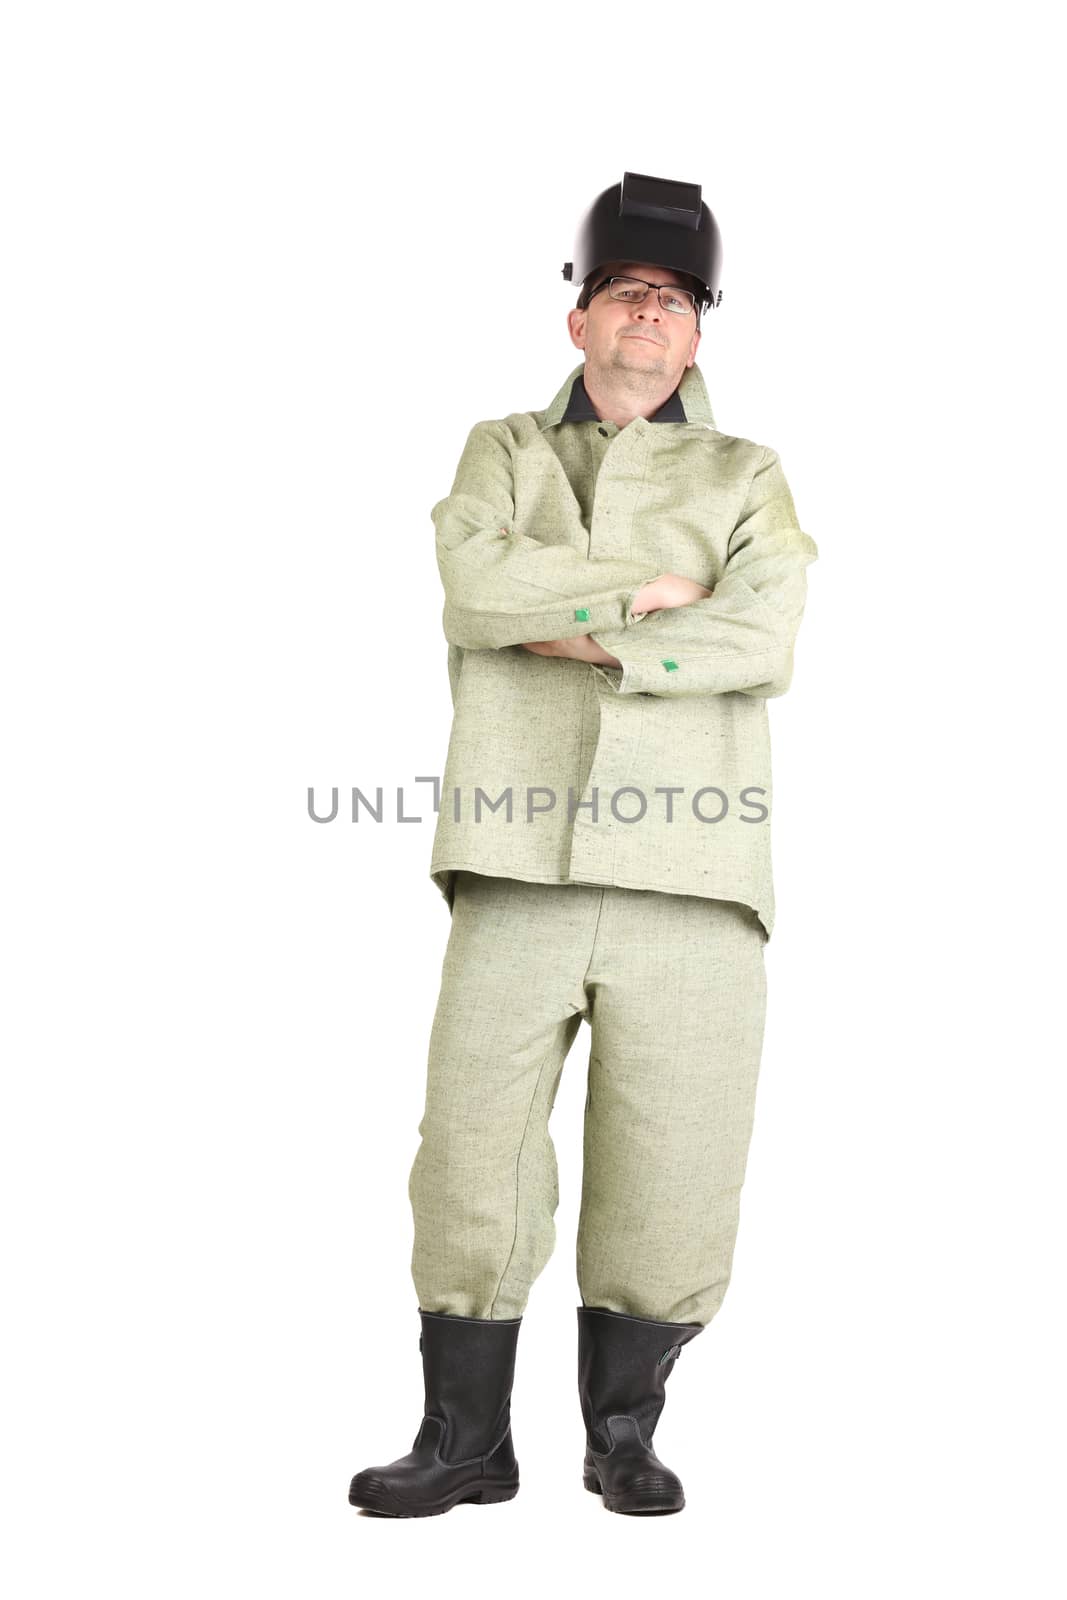 Confident welder in the mask. Isolated on a white background.